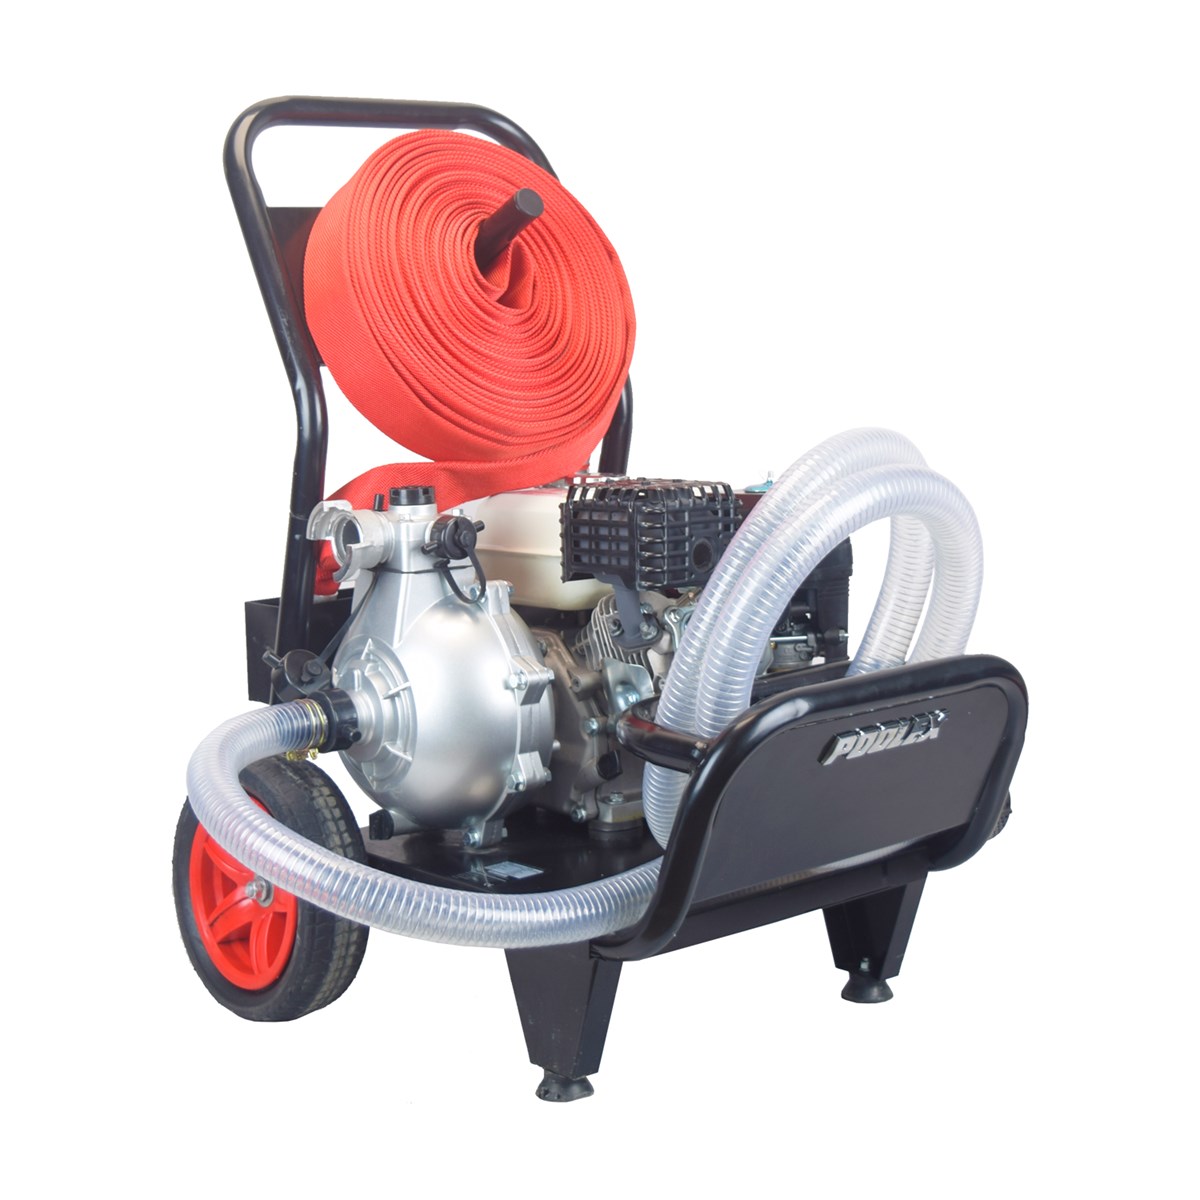 Pool Sam - Motor pump for forest fire fighting